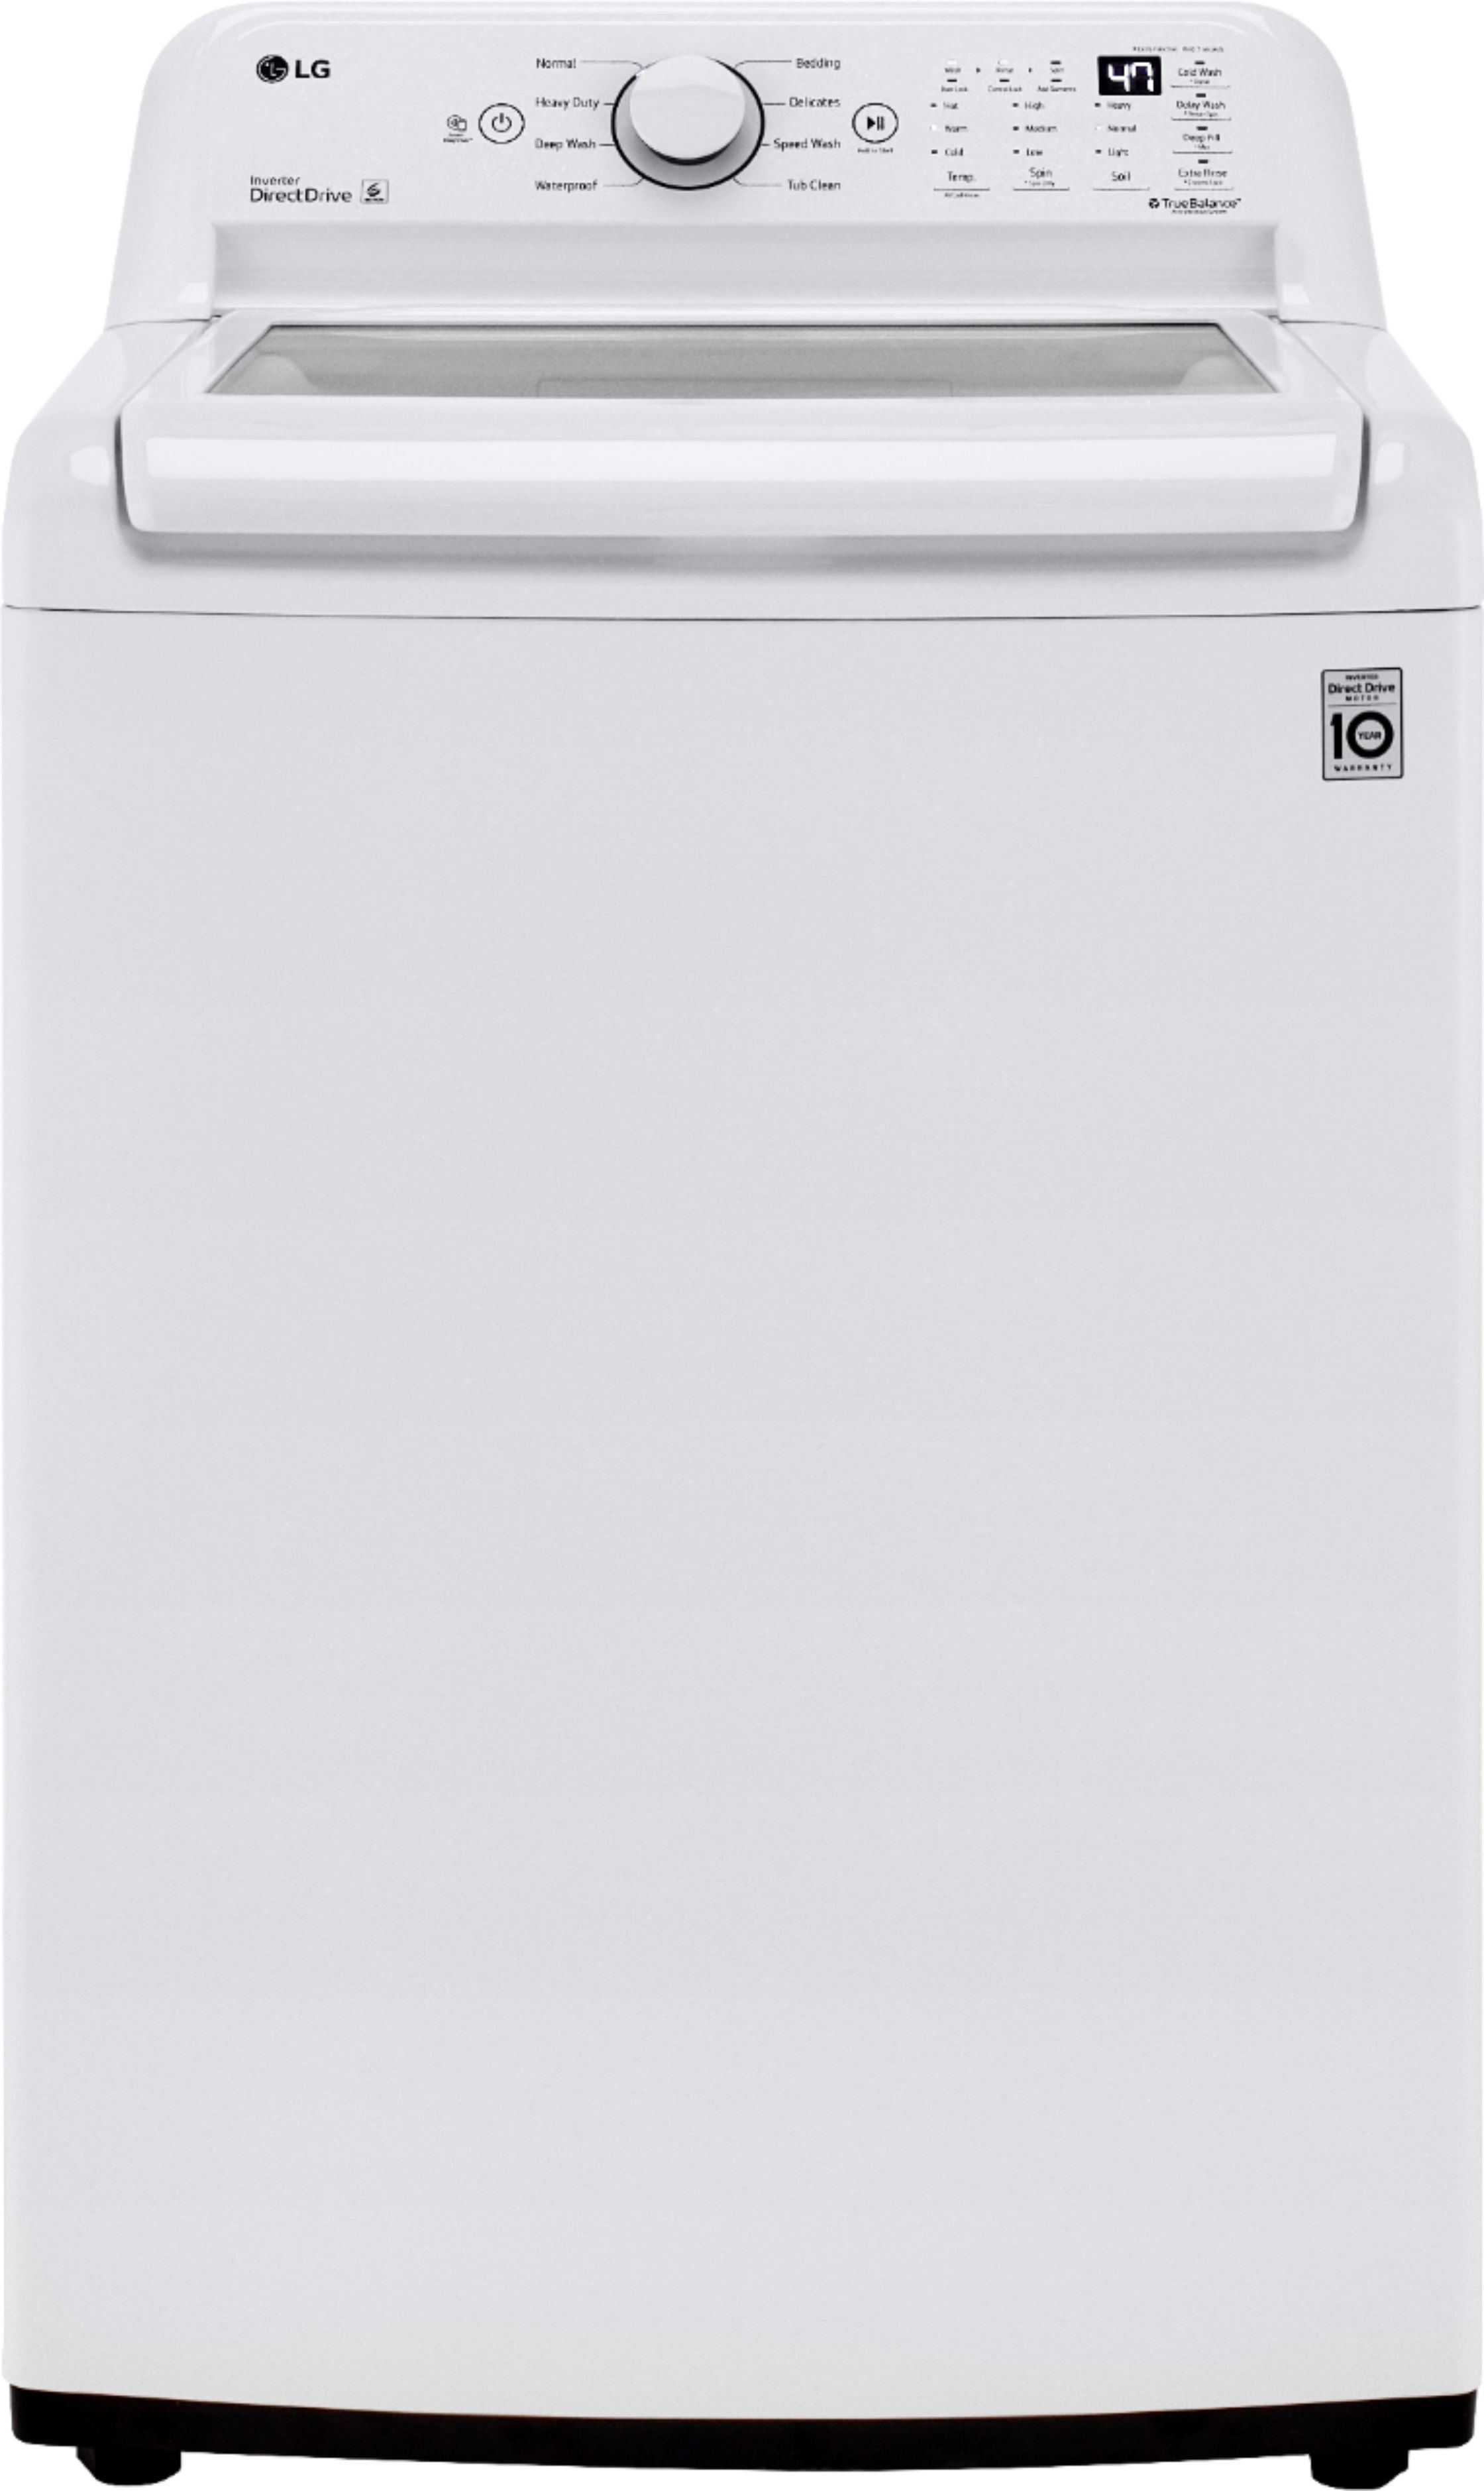 LG 4.3 Cu. Ft. High-Efficiency Top Load Washer with TurboDrum Technology  White WT7005CW - Best Buy